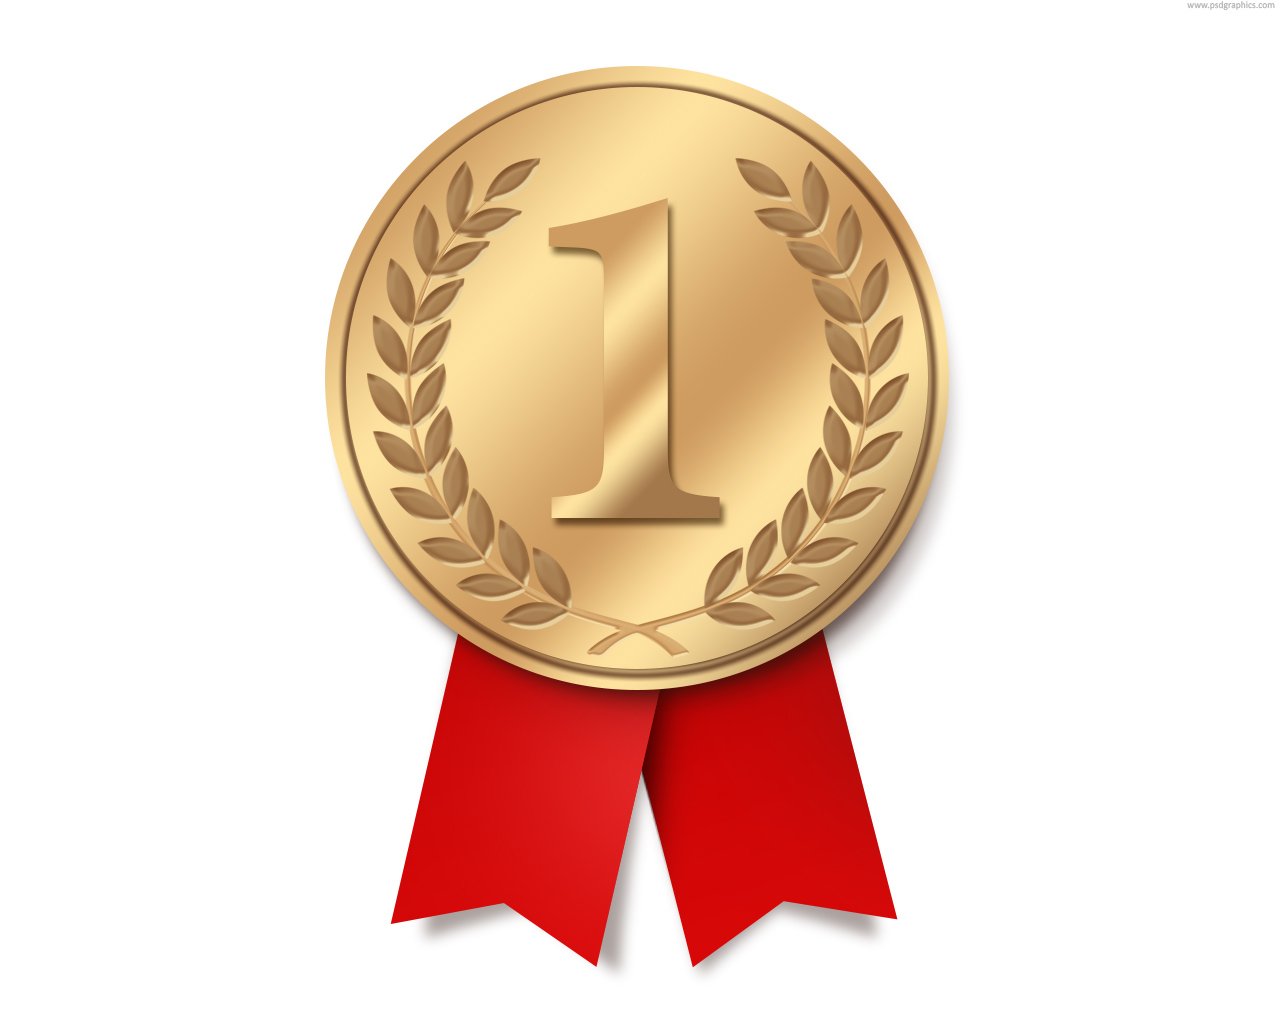 gold-medal-with-ribbon-psd-psdgraphics